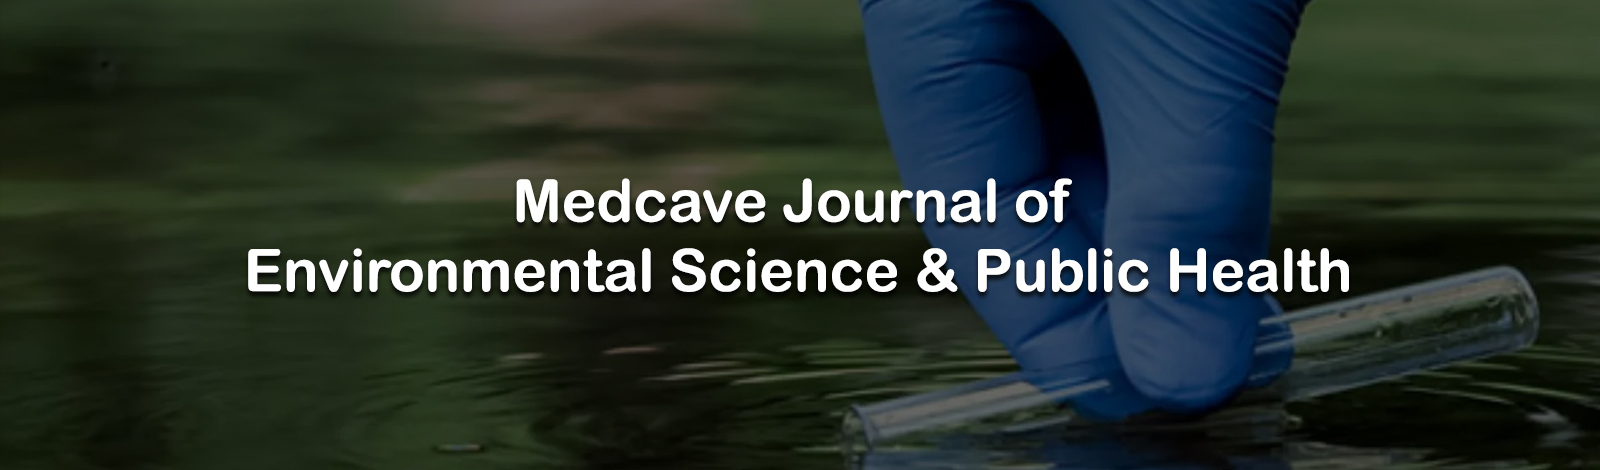 Medcave Journal of Environmental Research and Public Health